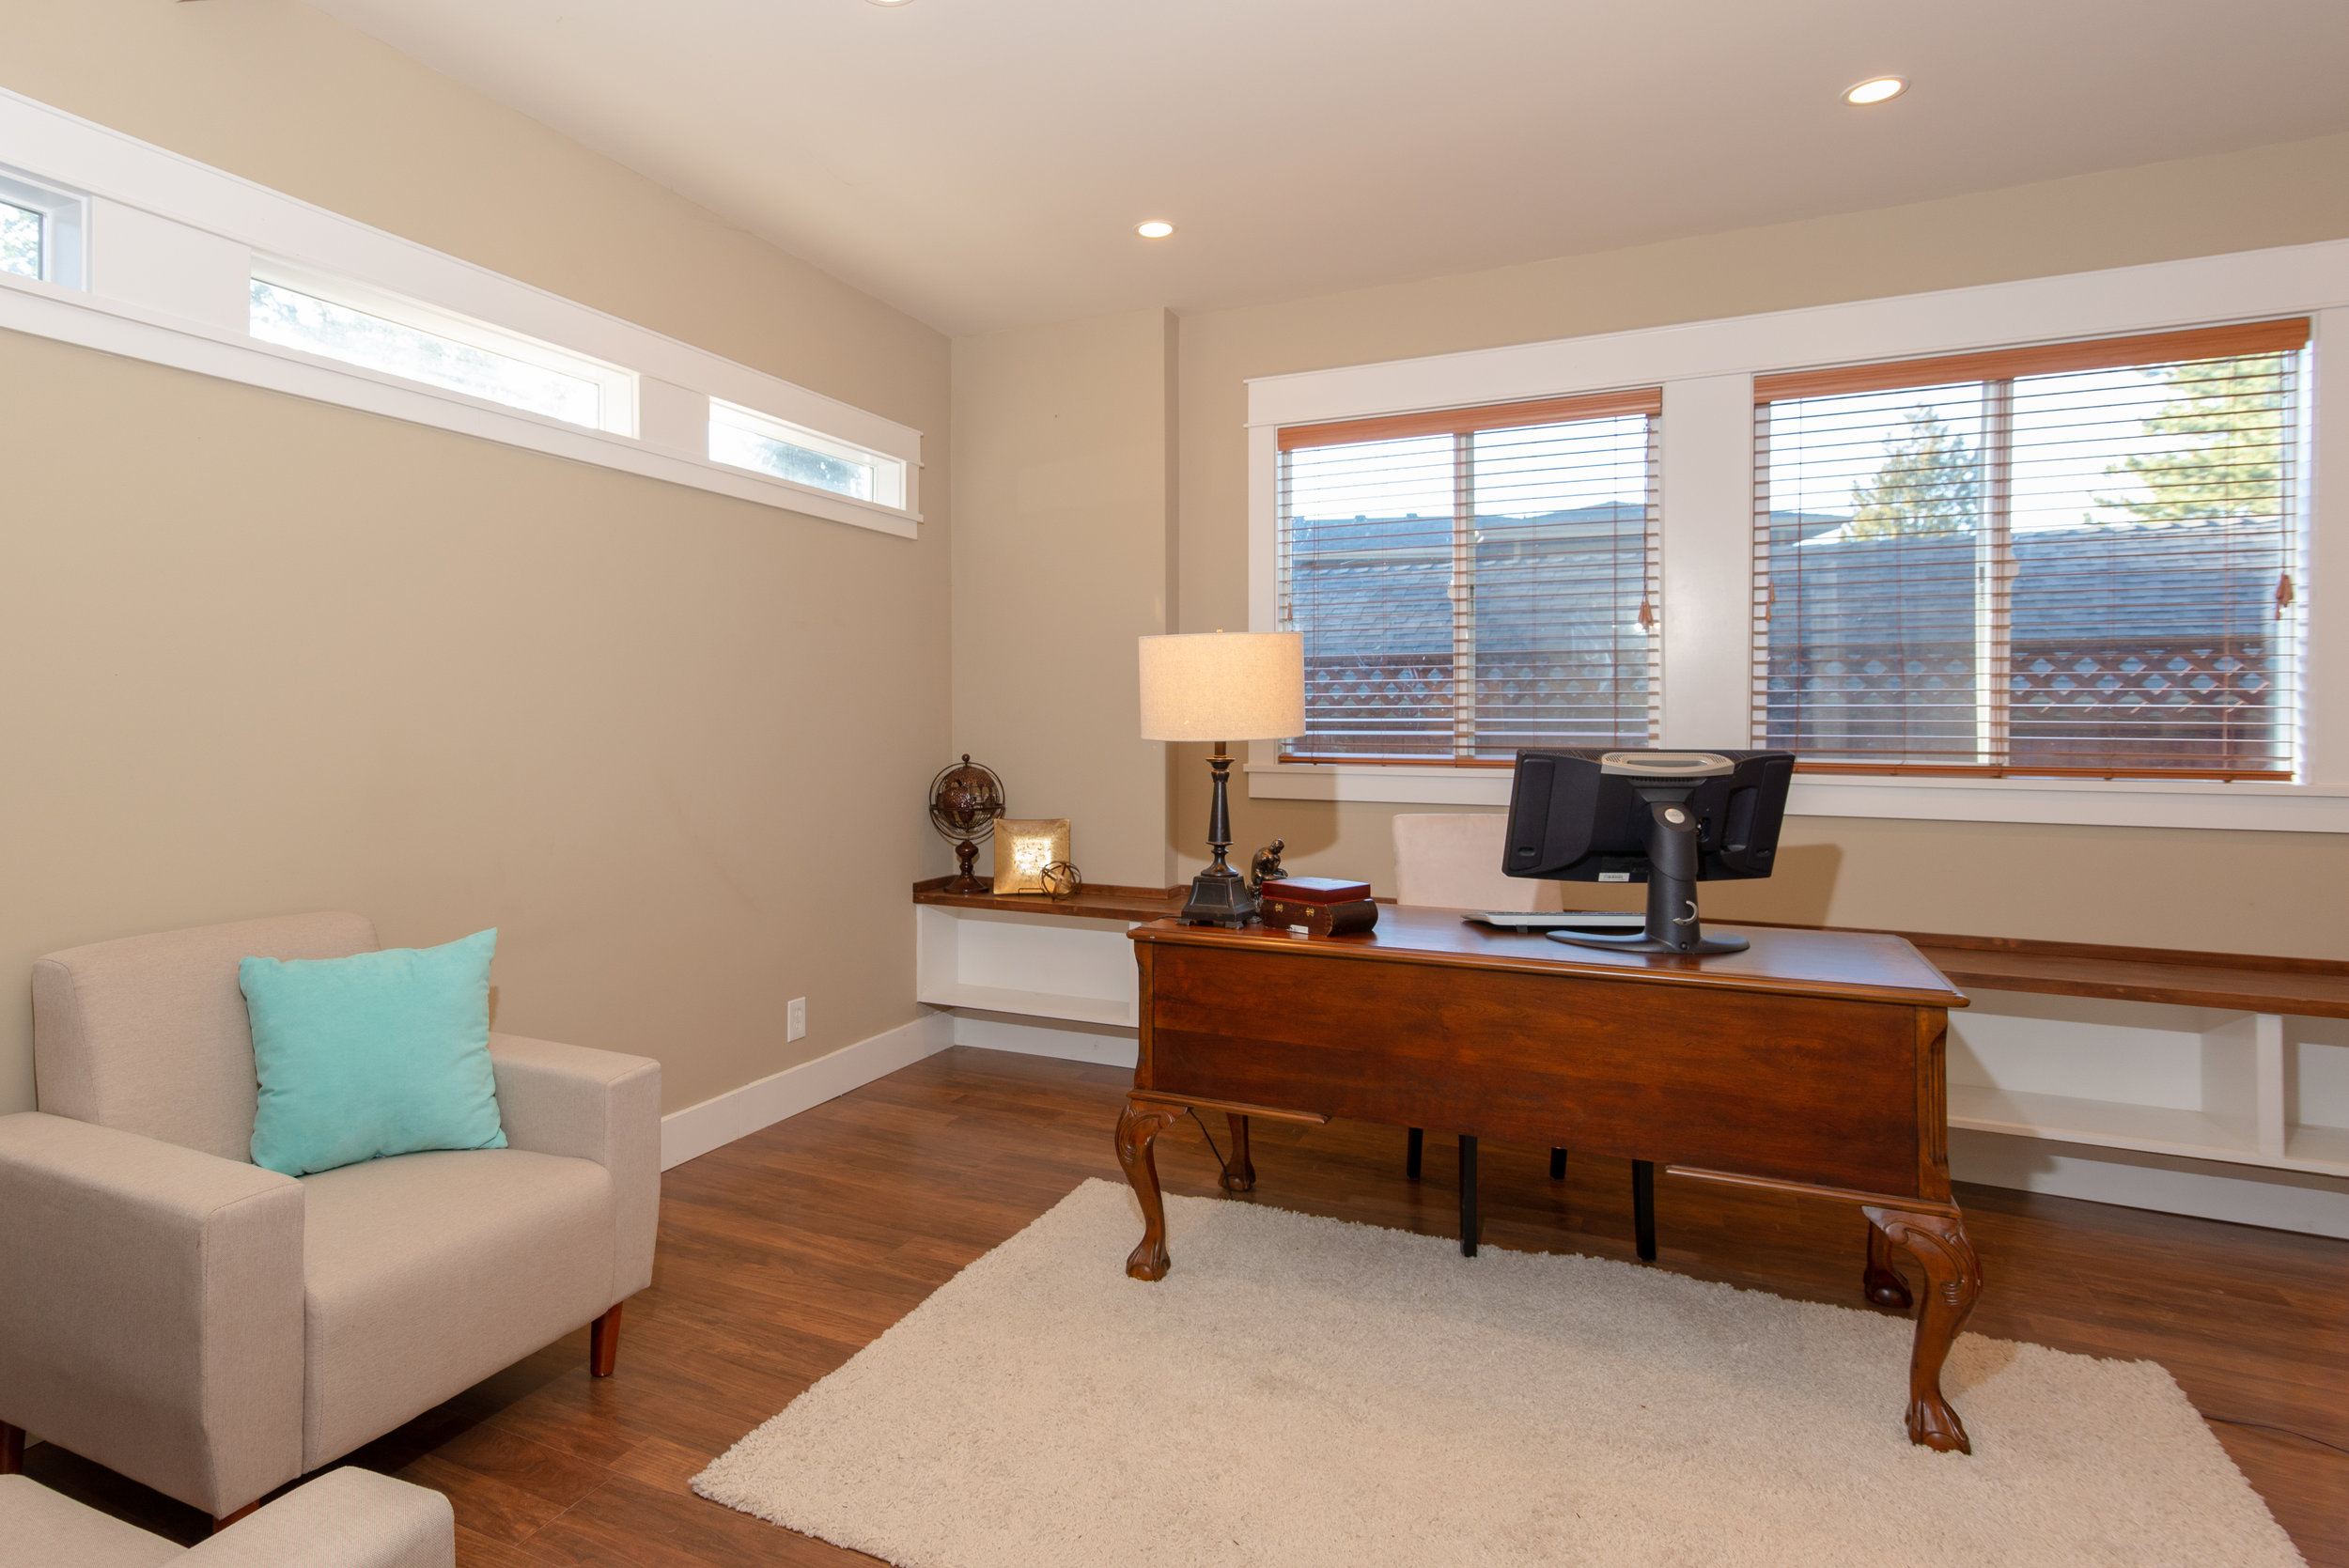  Third bedroom on the main floor offers many options. Private guest room, third bedroom, office or study. 